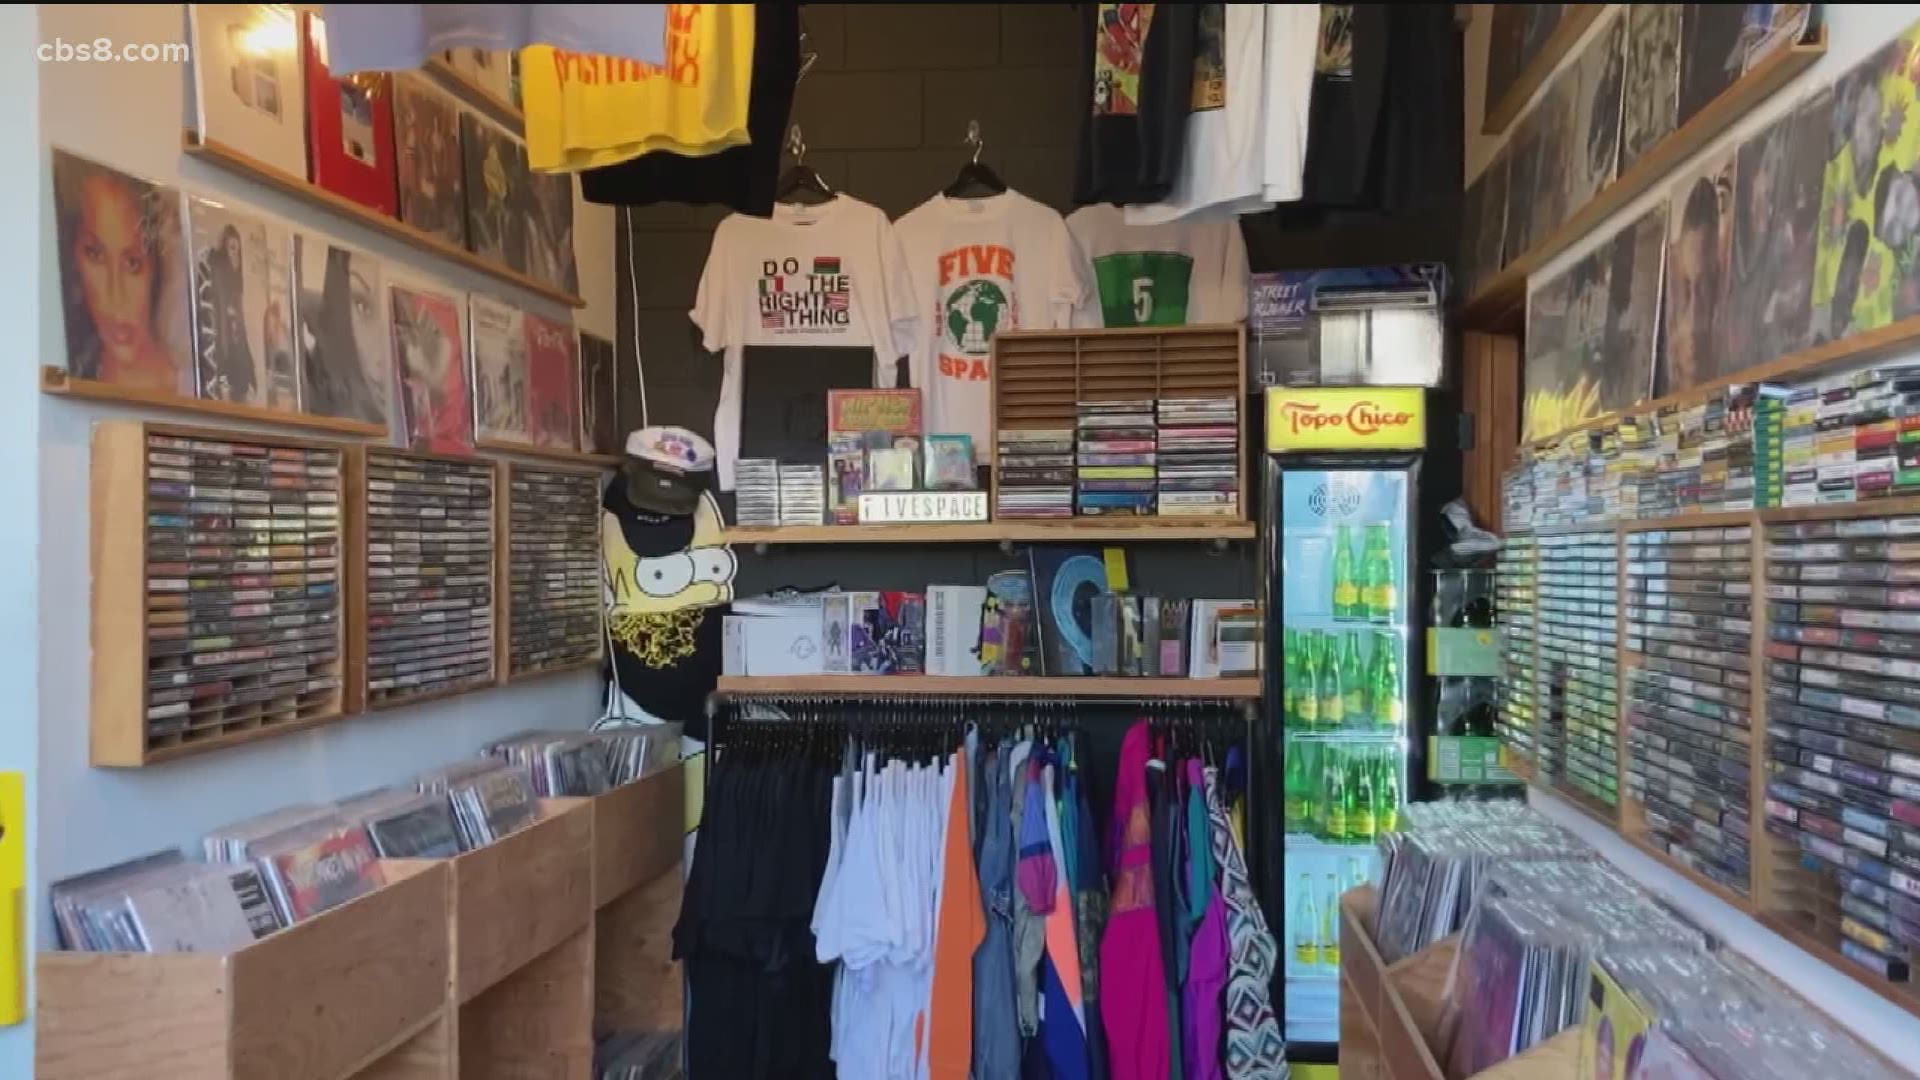 Fivespace Shop is a Black-owned record shop in North Park with a deep Hip Hop selection.